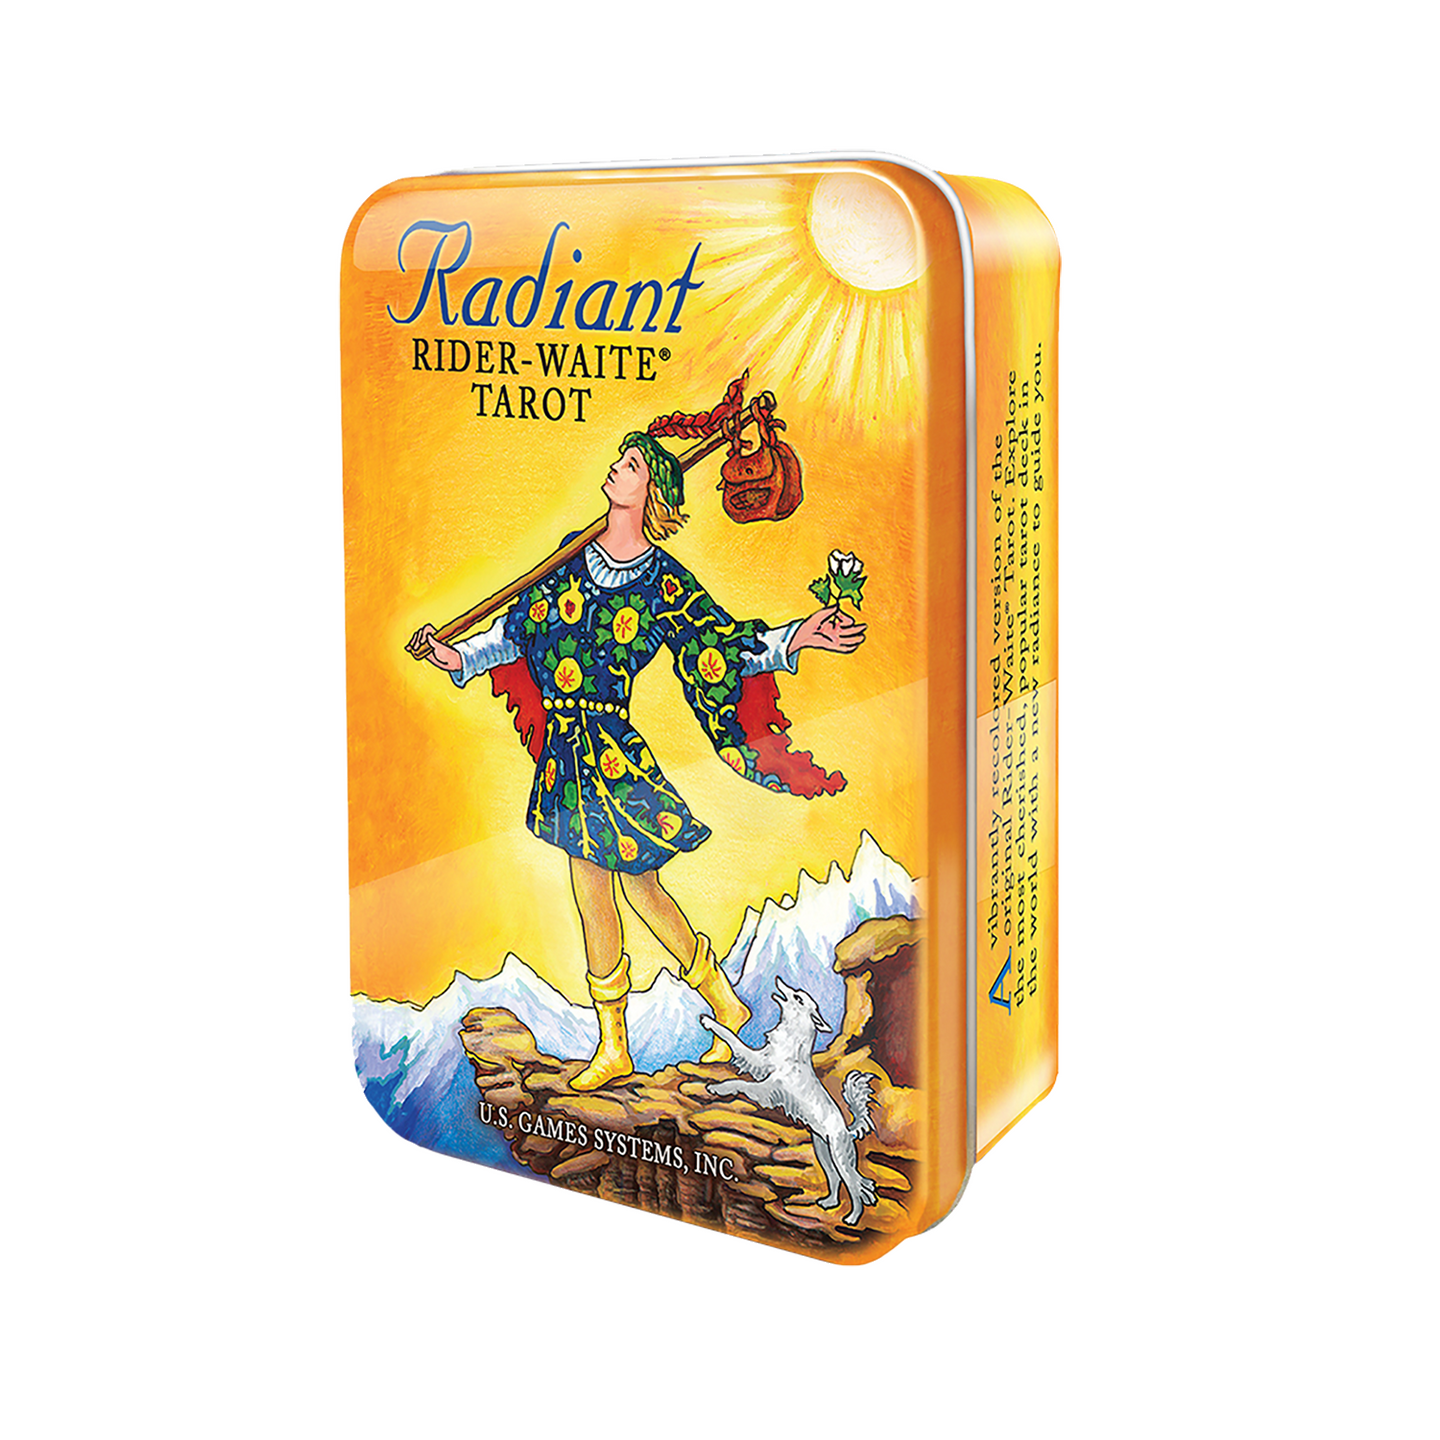 Radiant Rider-Waite Tarot Card Deck and Book in Tin Box Divination Oracle Small Pocket Size